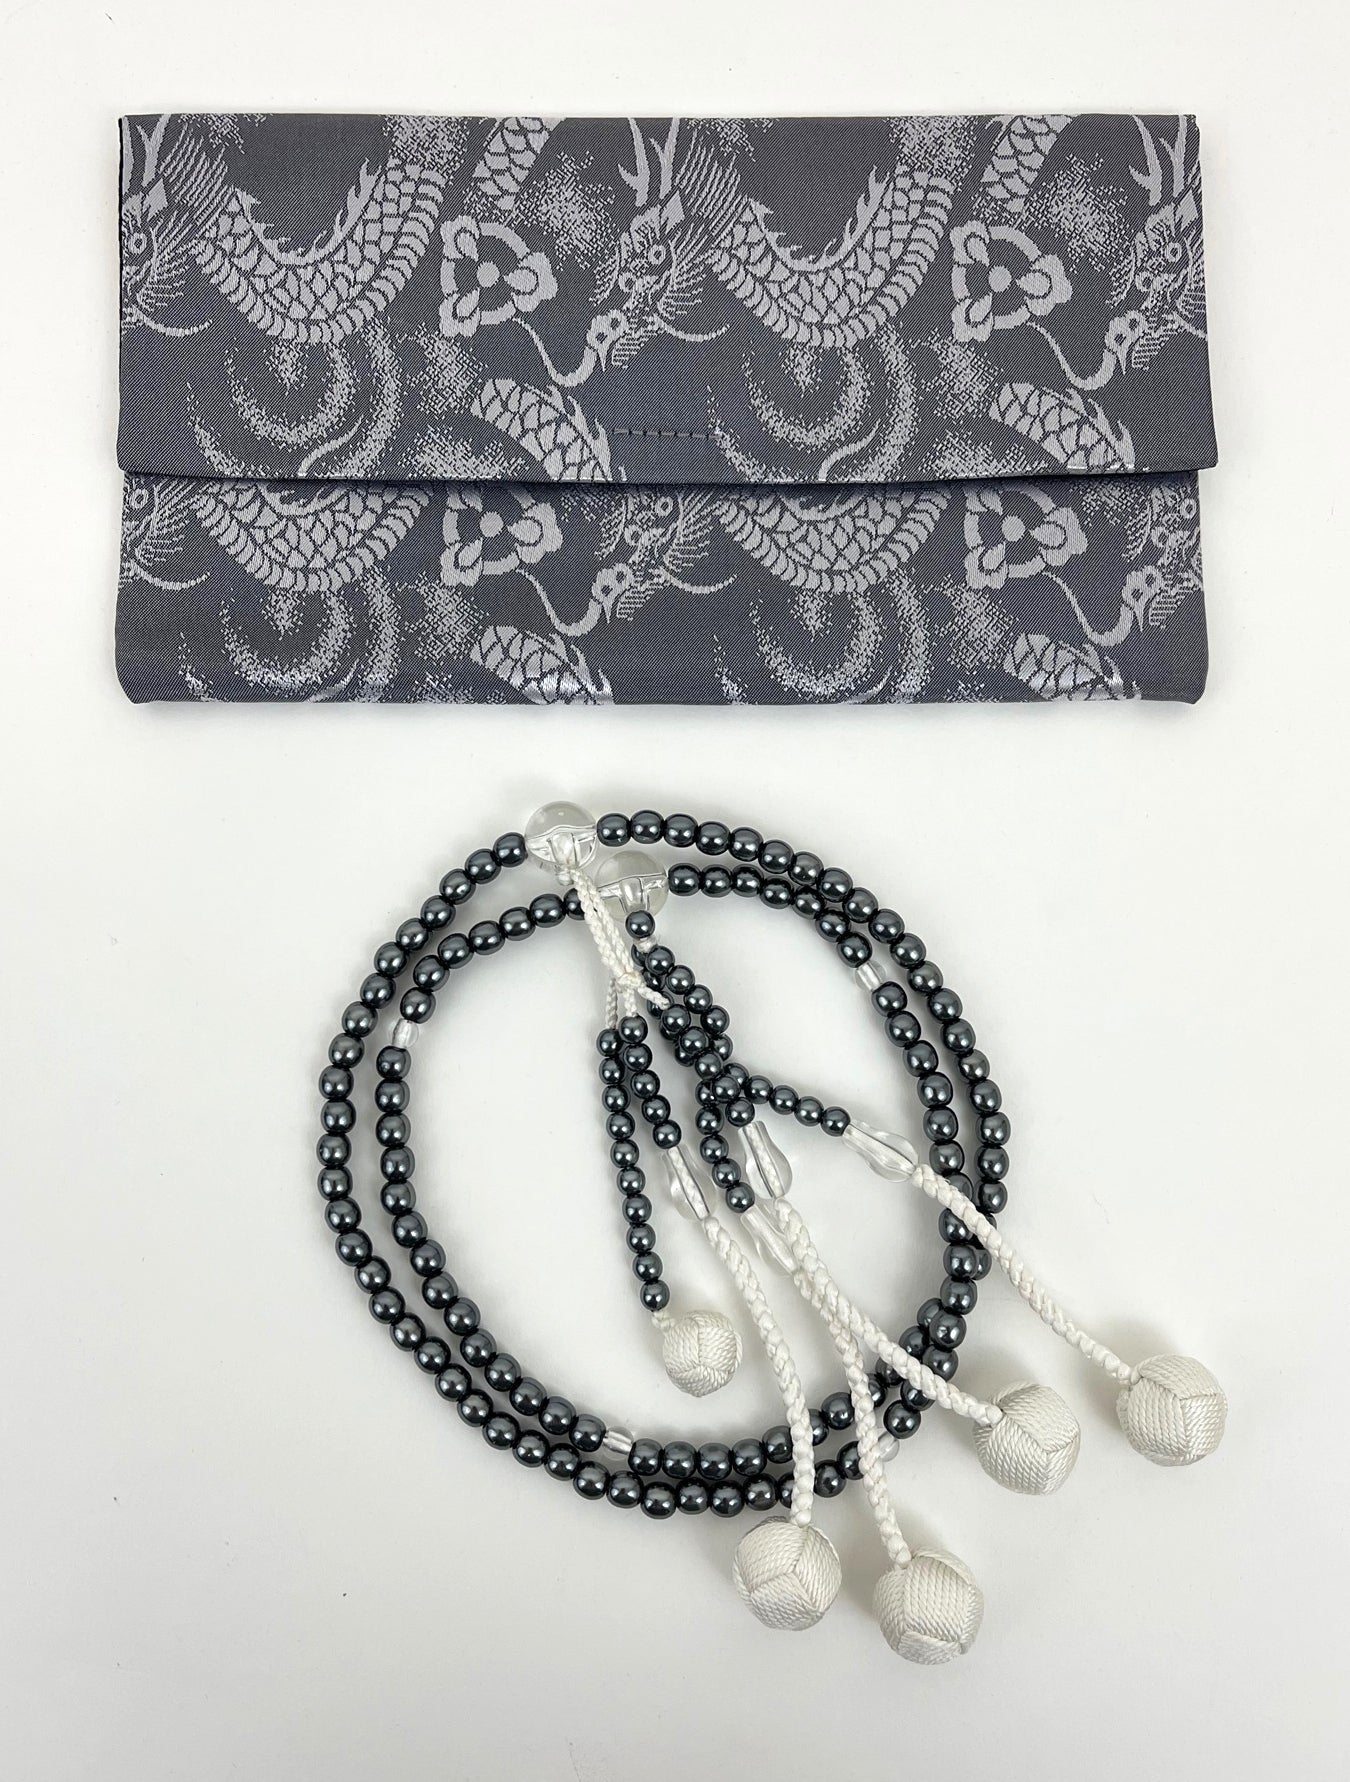 Black Pearl Beads with Knitted Tassels Beads Set - Large Beads (Large Beads Case)